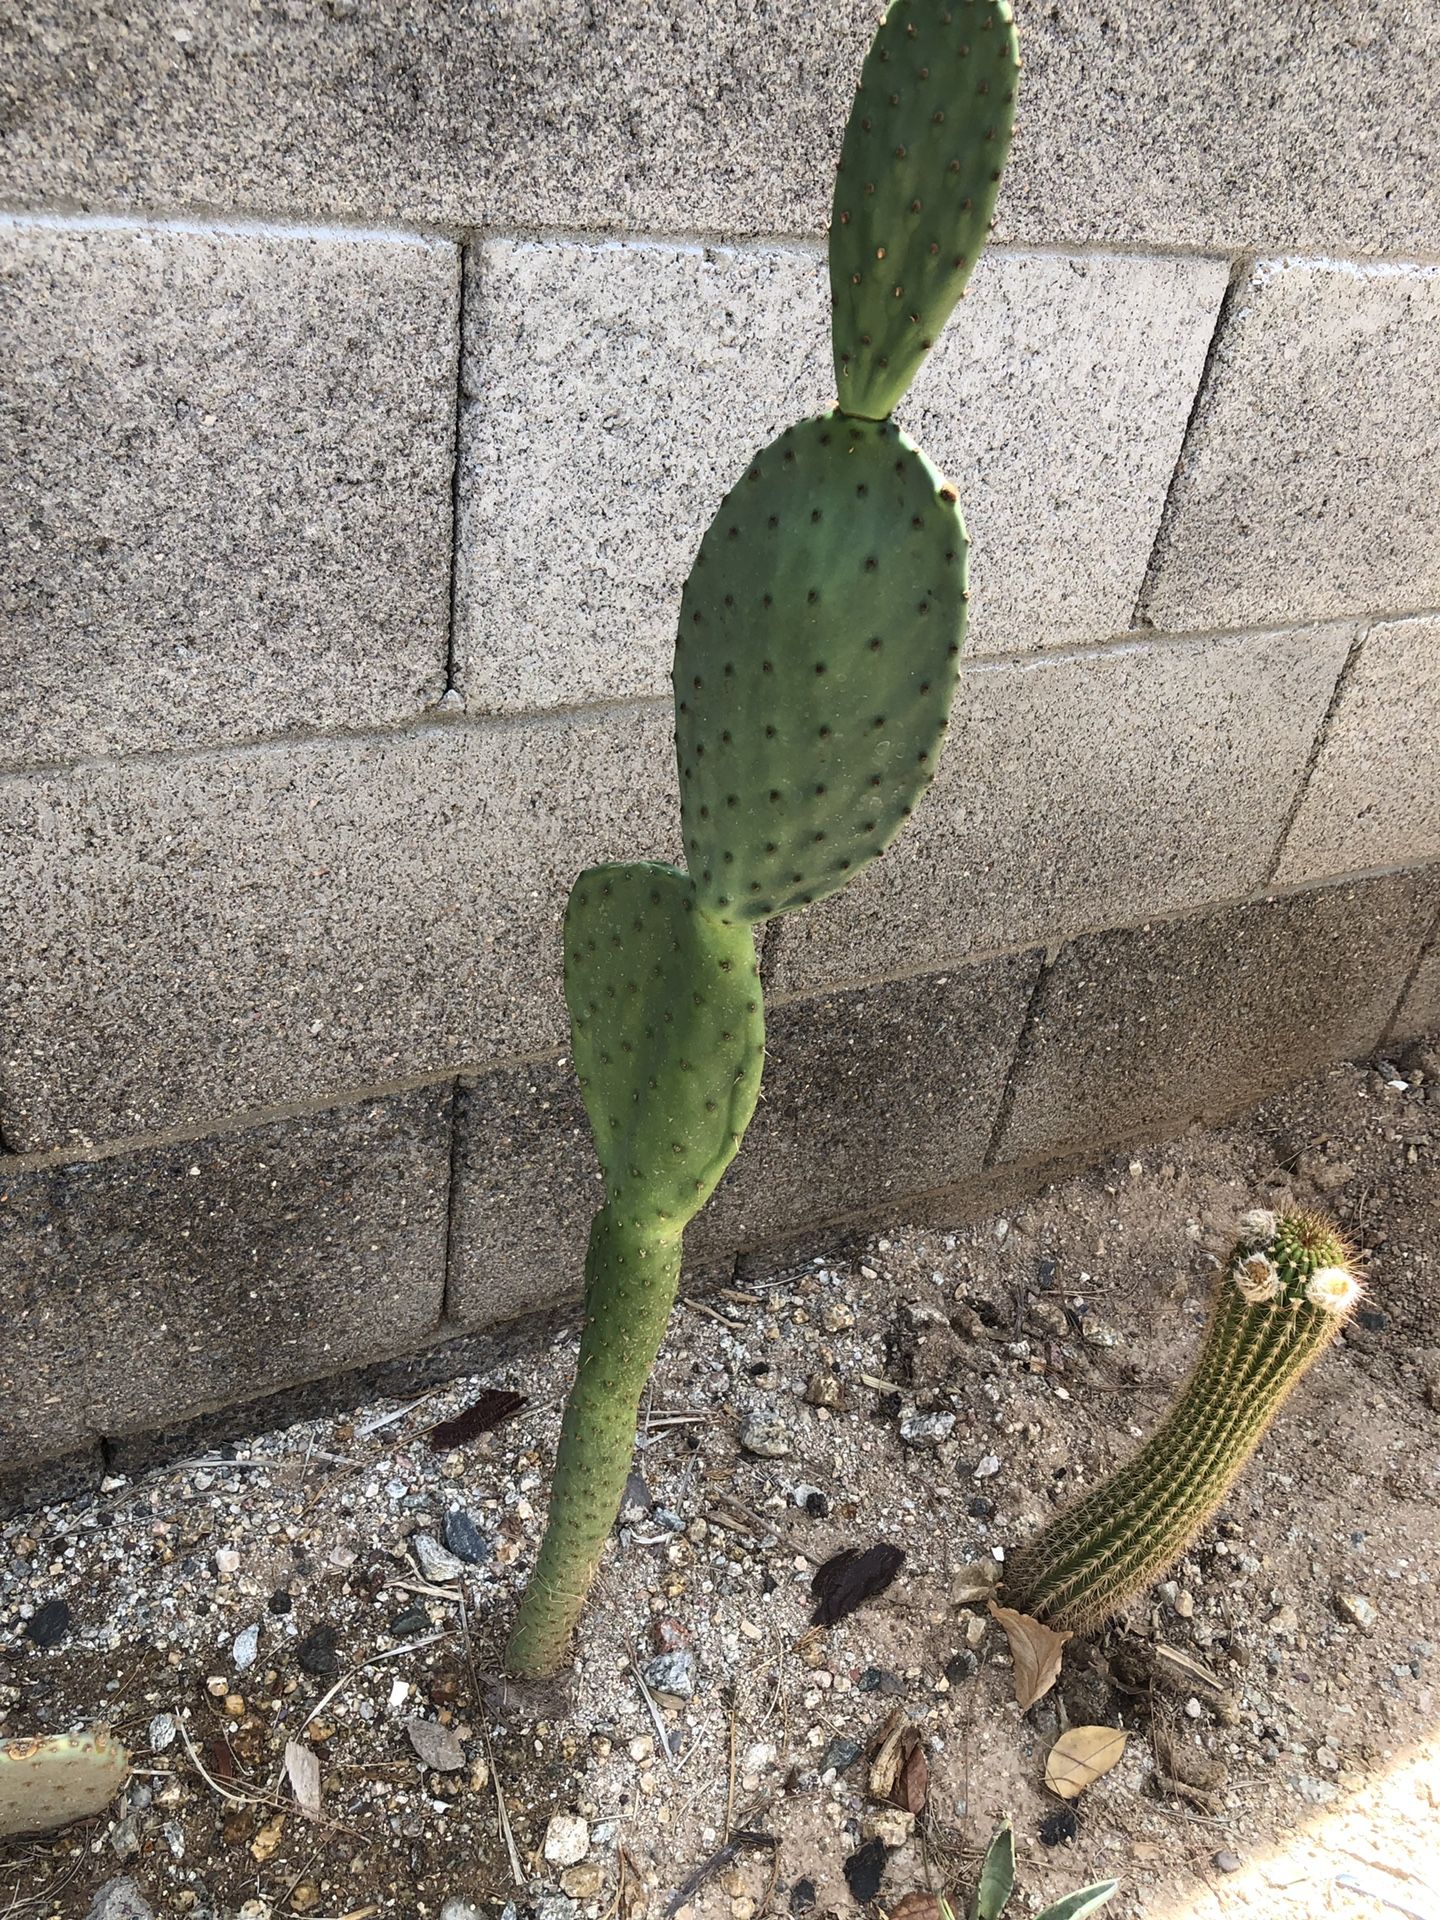 Prickly Pear Young Cactus 🌵 2.5’ Tall